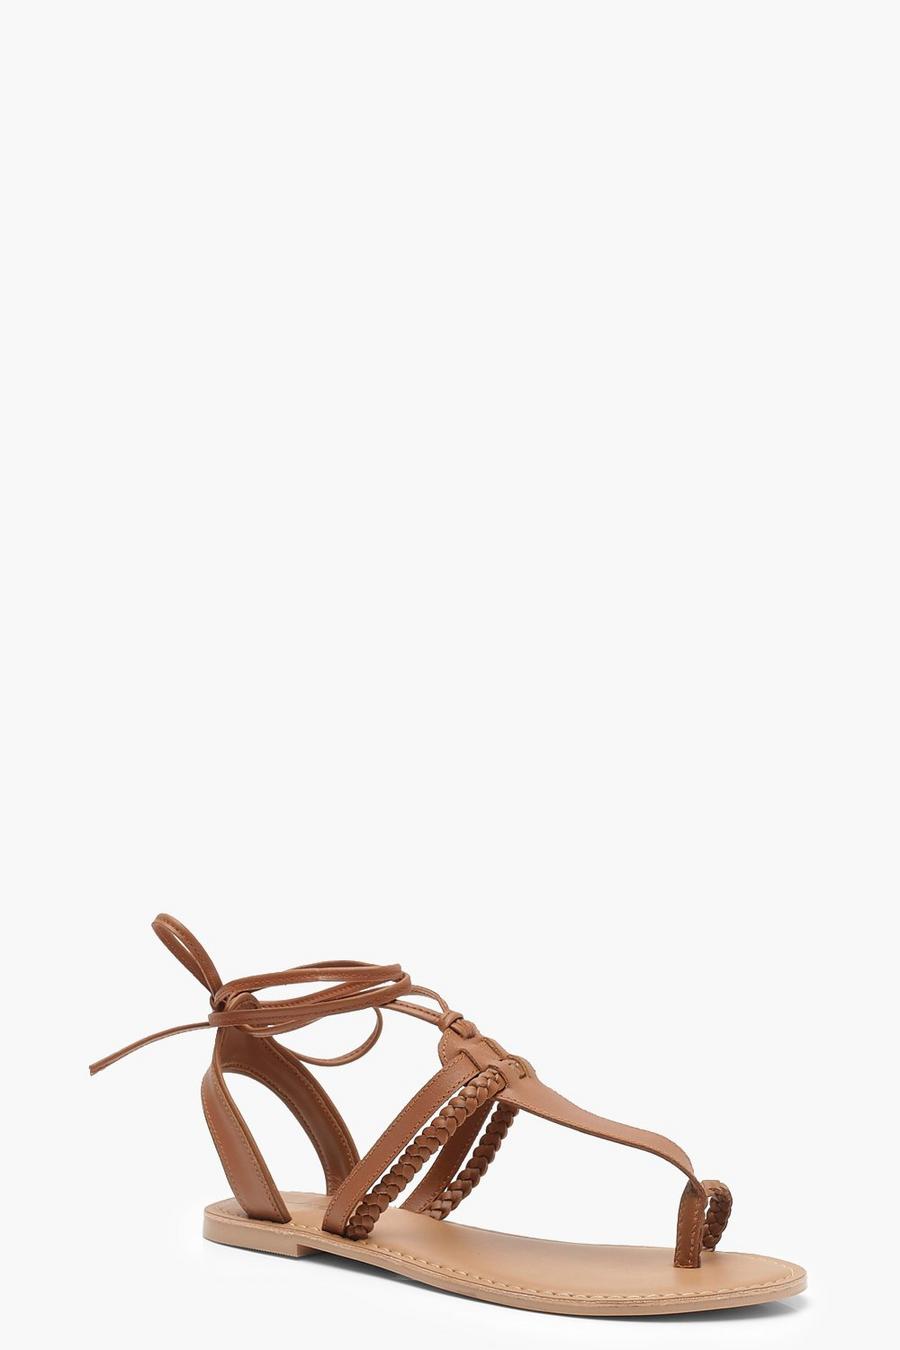 Tan Leather Toe Post Ghillie Sandals image number 1